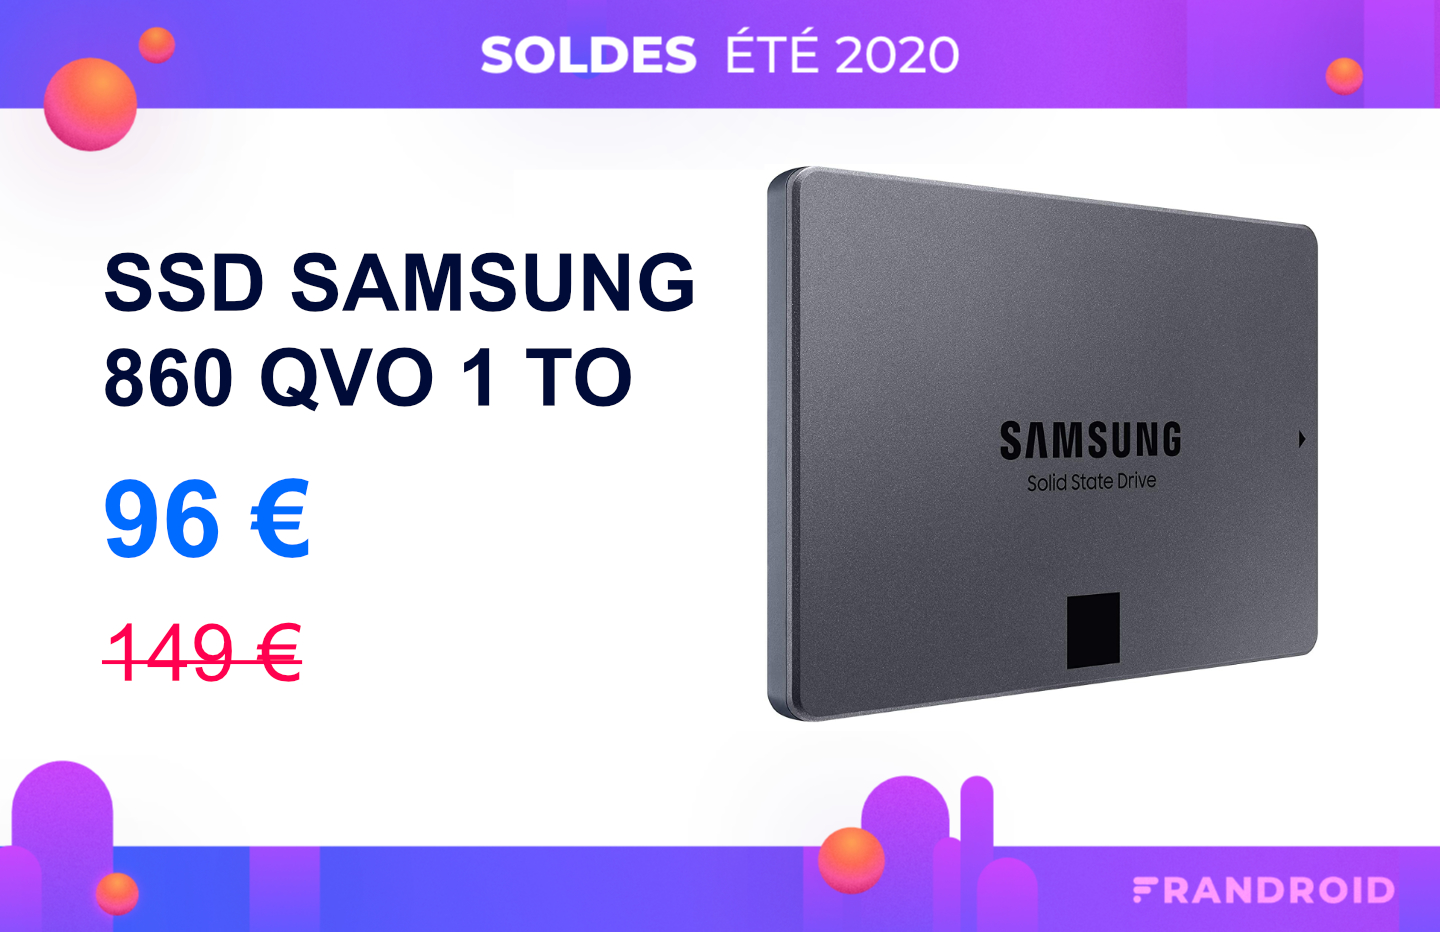 https://images.frandroid.com/wp-content/uploads/2020/07/samsung-ssd-1-to-860-qvo.jpg